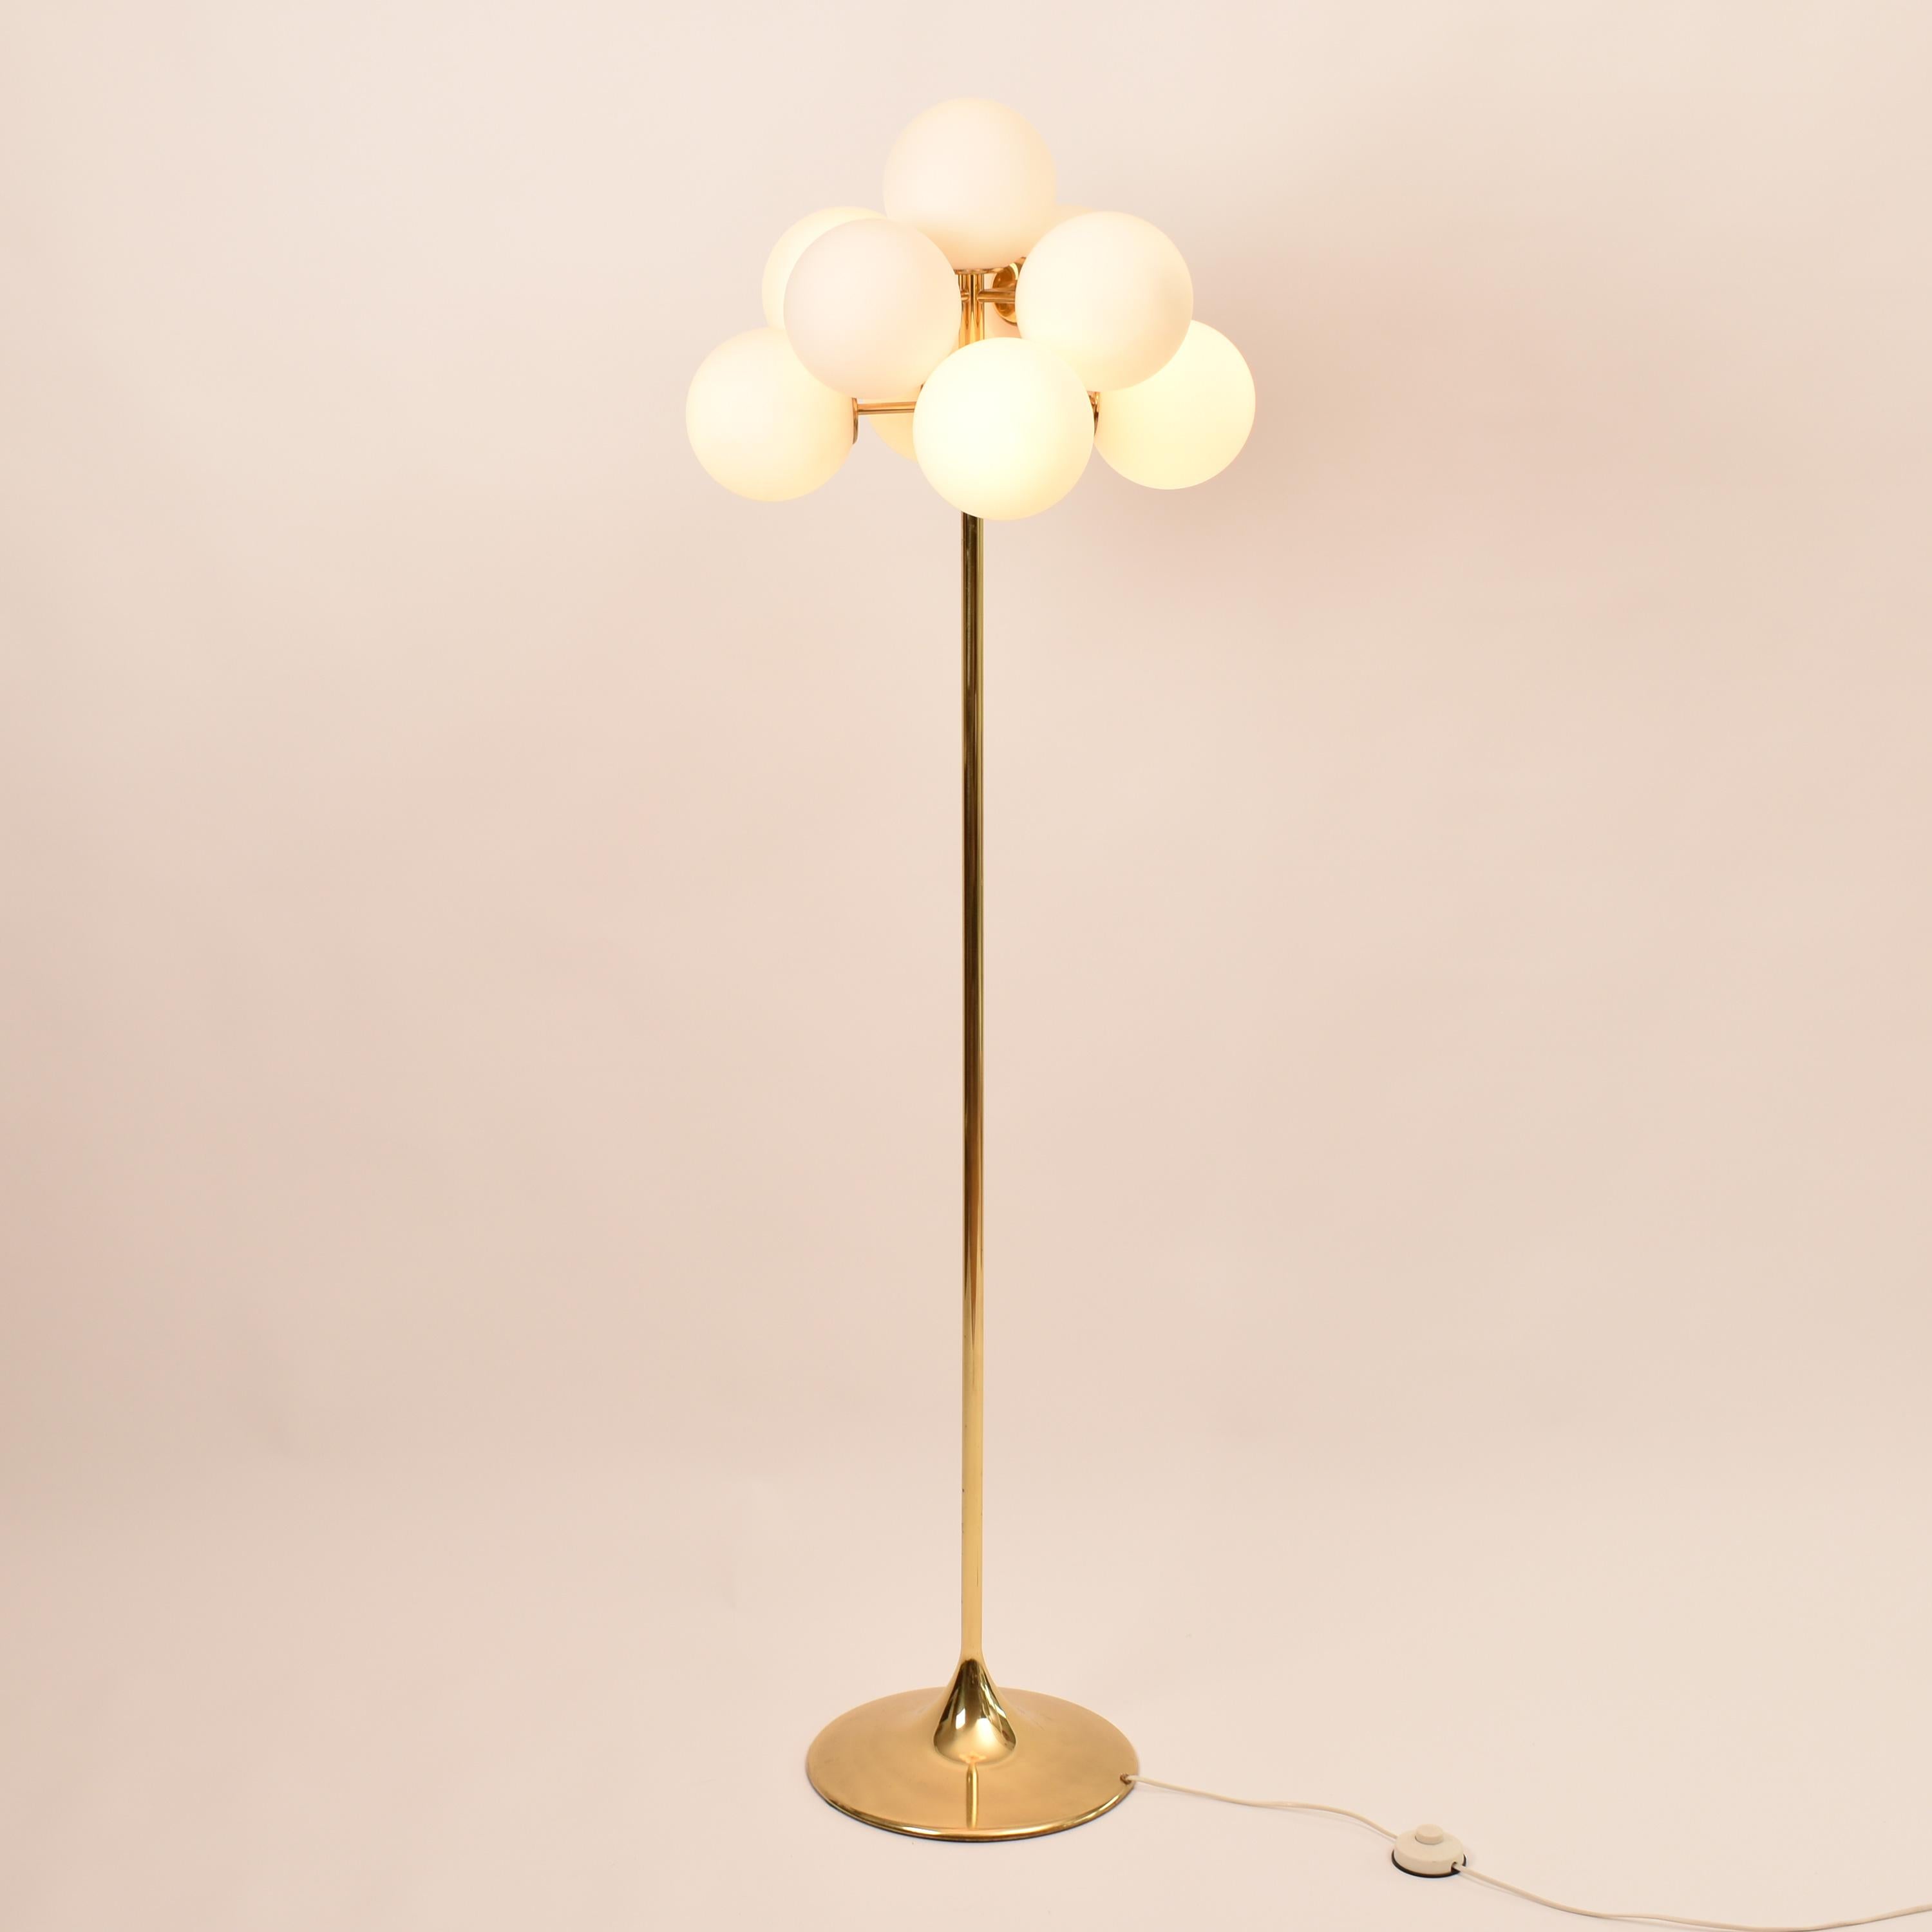 This floor lamp sputnik is a real statement piece, chic and elegant.
Designed by Eva Renée Nele Bode, artist and designer born in Germany in 1932 ( often attributed to Max Bill ), manufatured by Temde Leuchten, Switzerland.
The cloud of nine hand